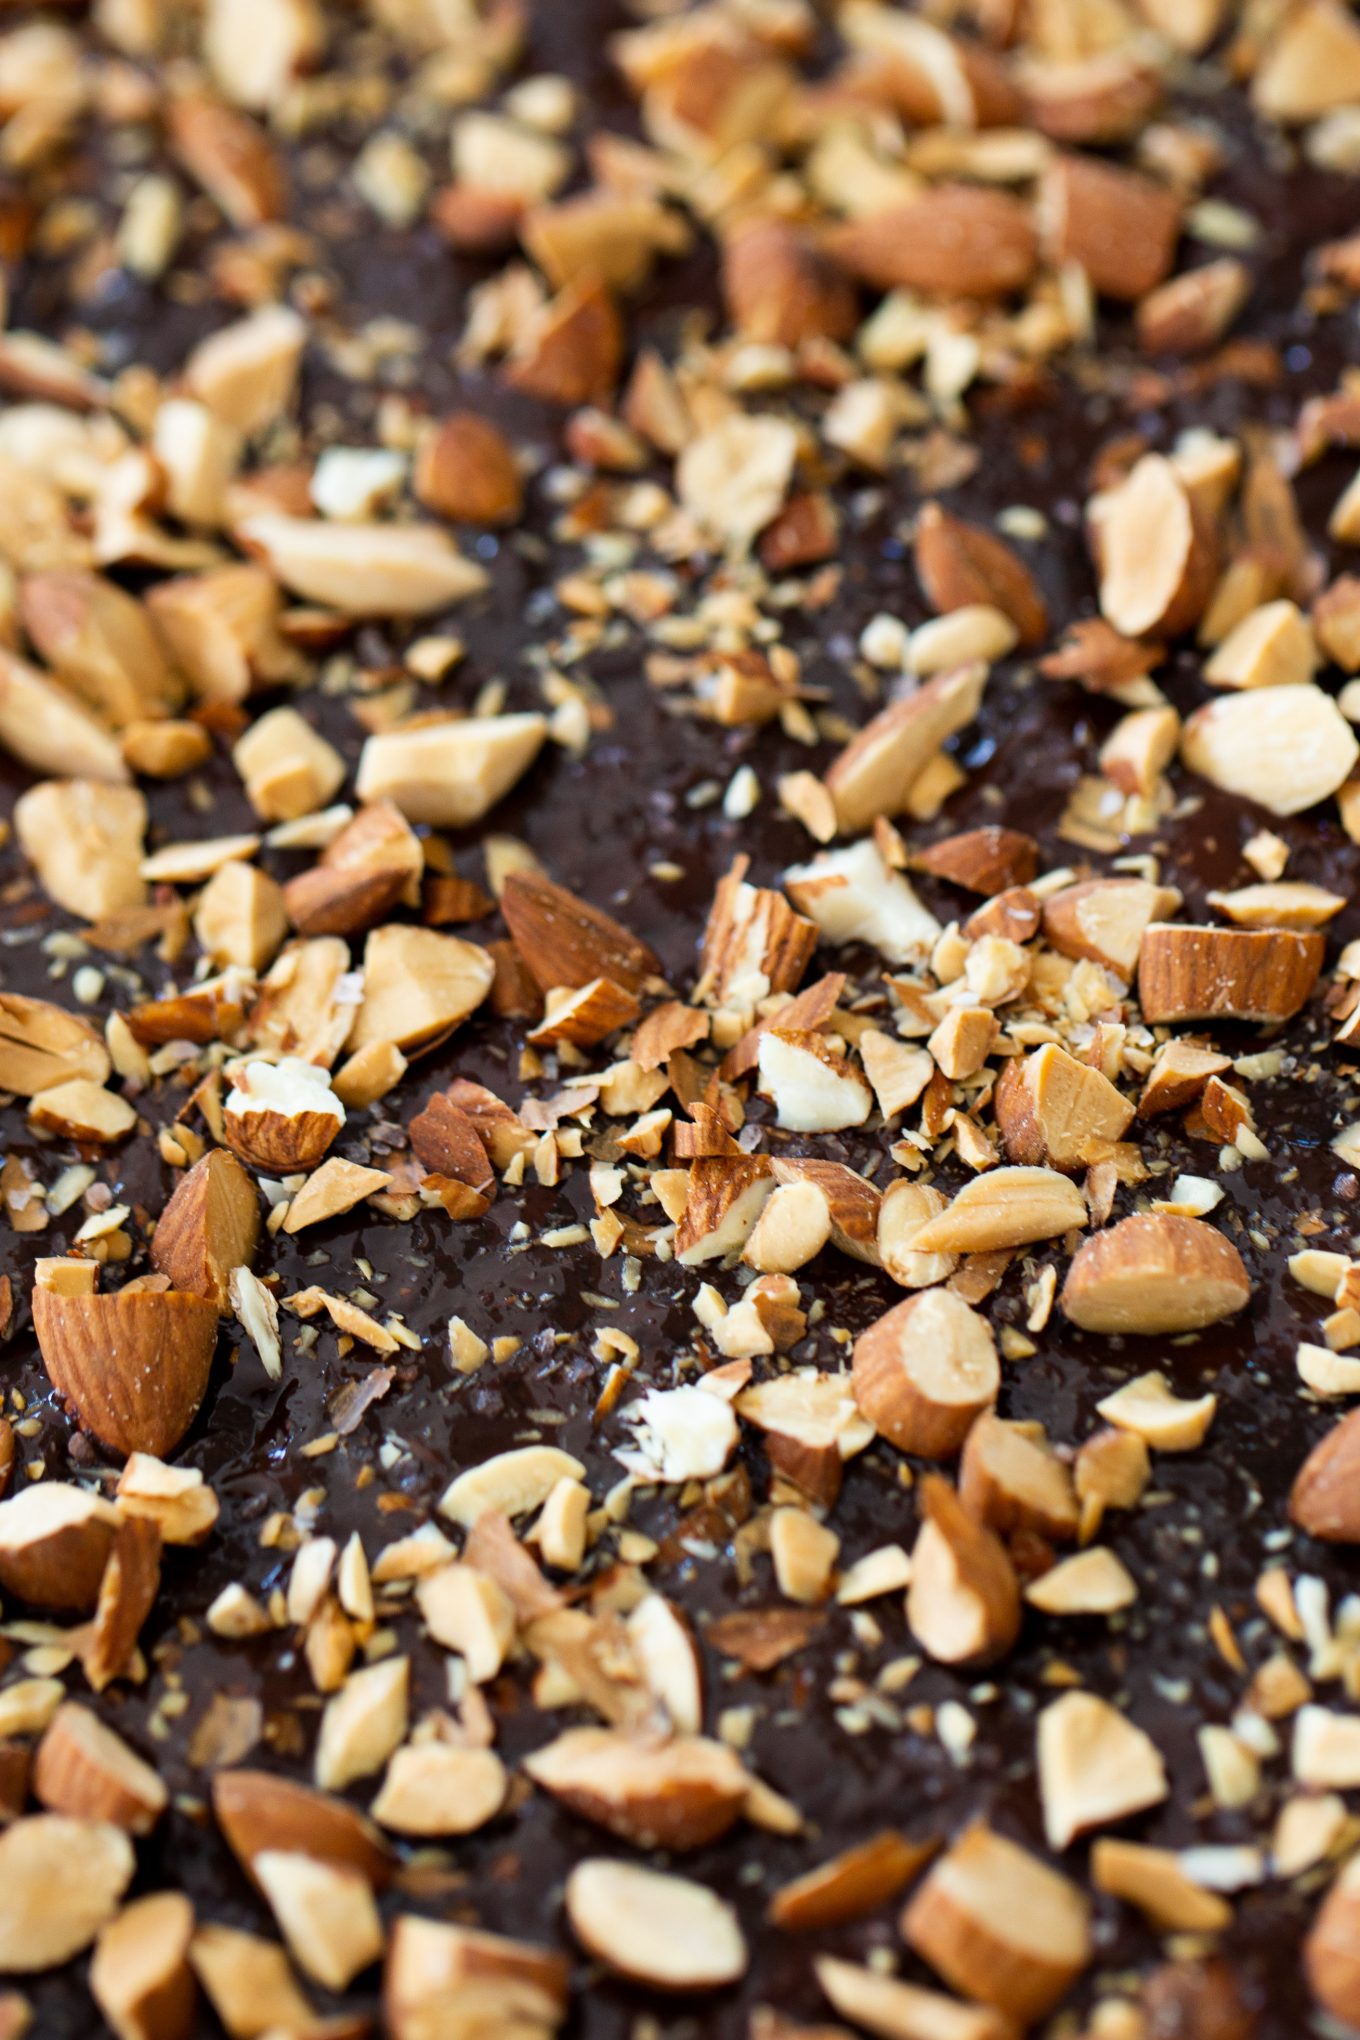 vegan toffee covered in dark chocolate and chopped almonds